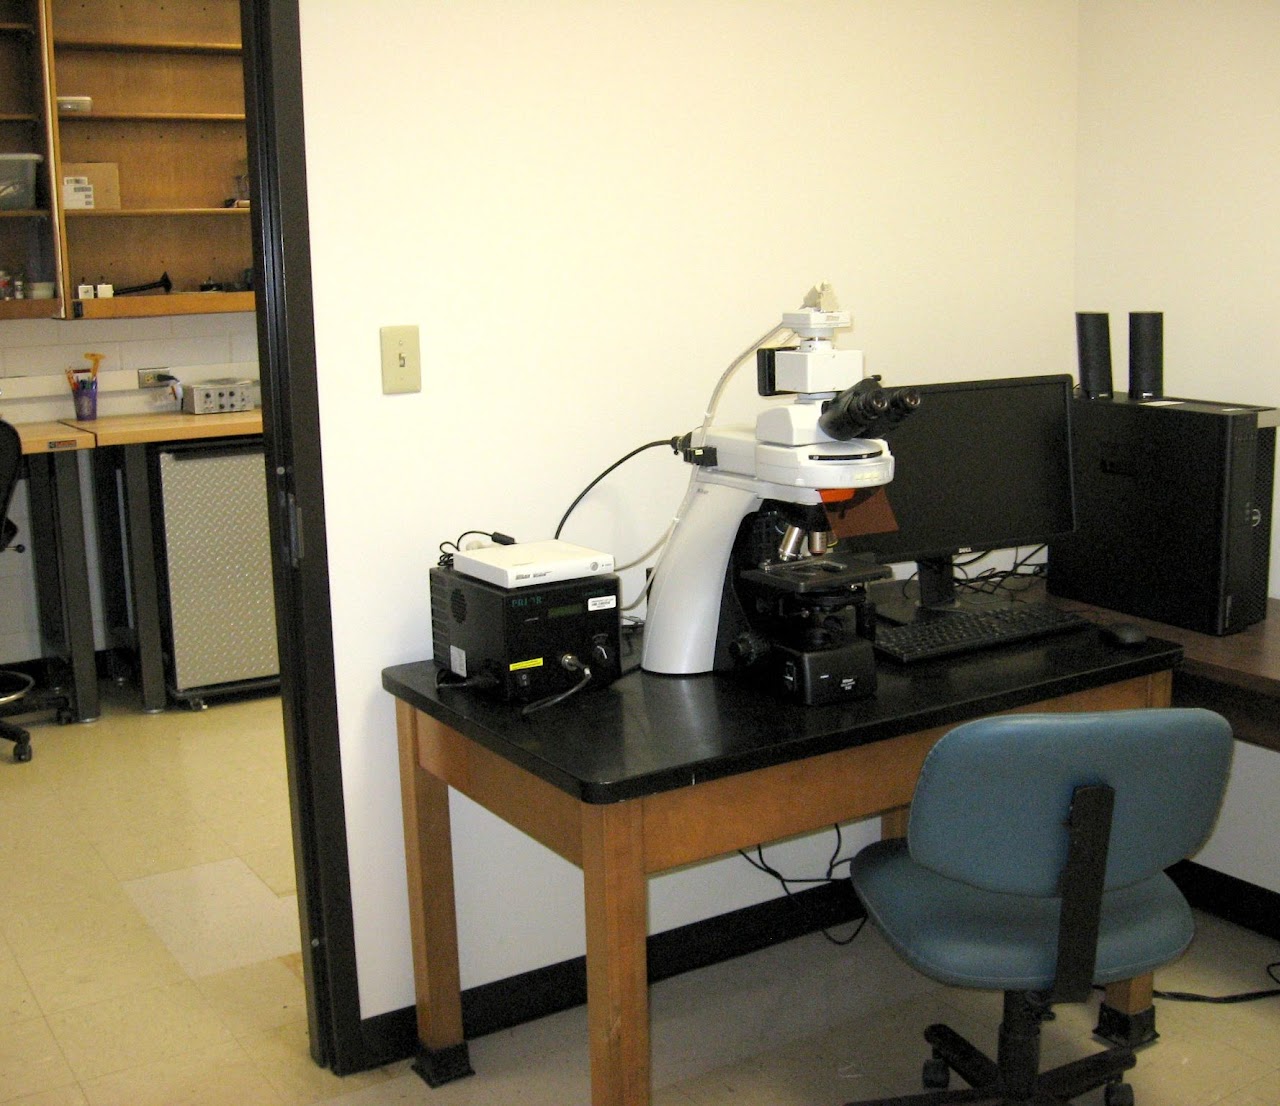 microscope and computer station